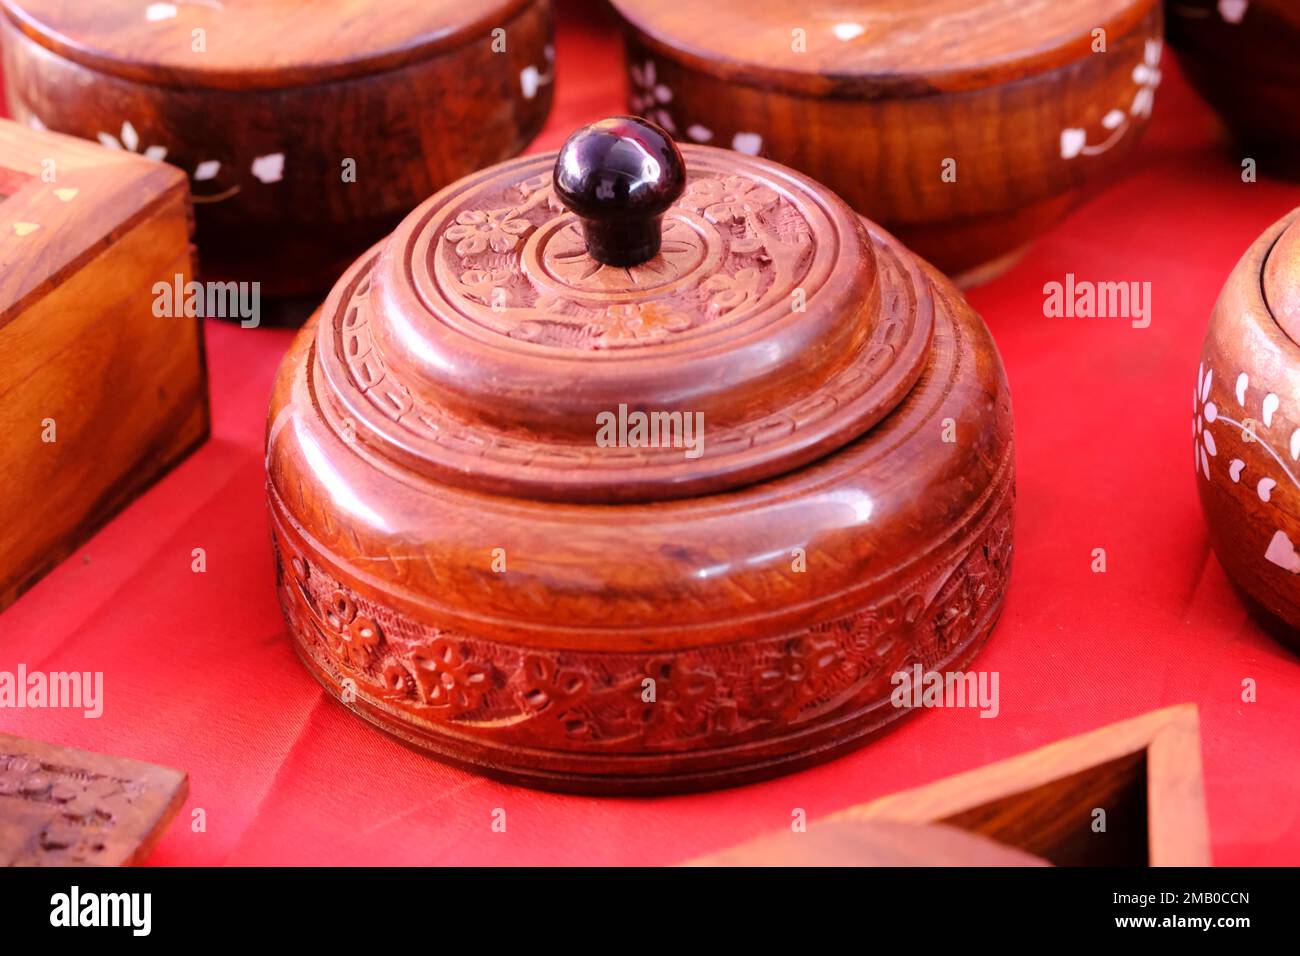 Wooden handcraft , carved on wooden, toys and articles on display. Incredible India. Stock Photo